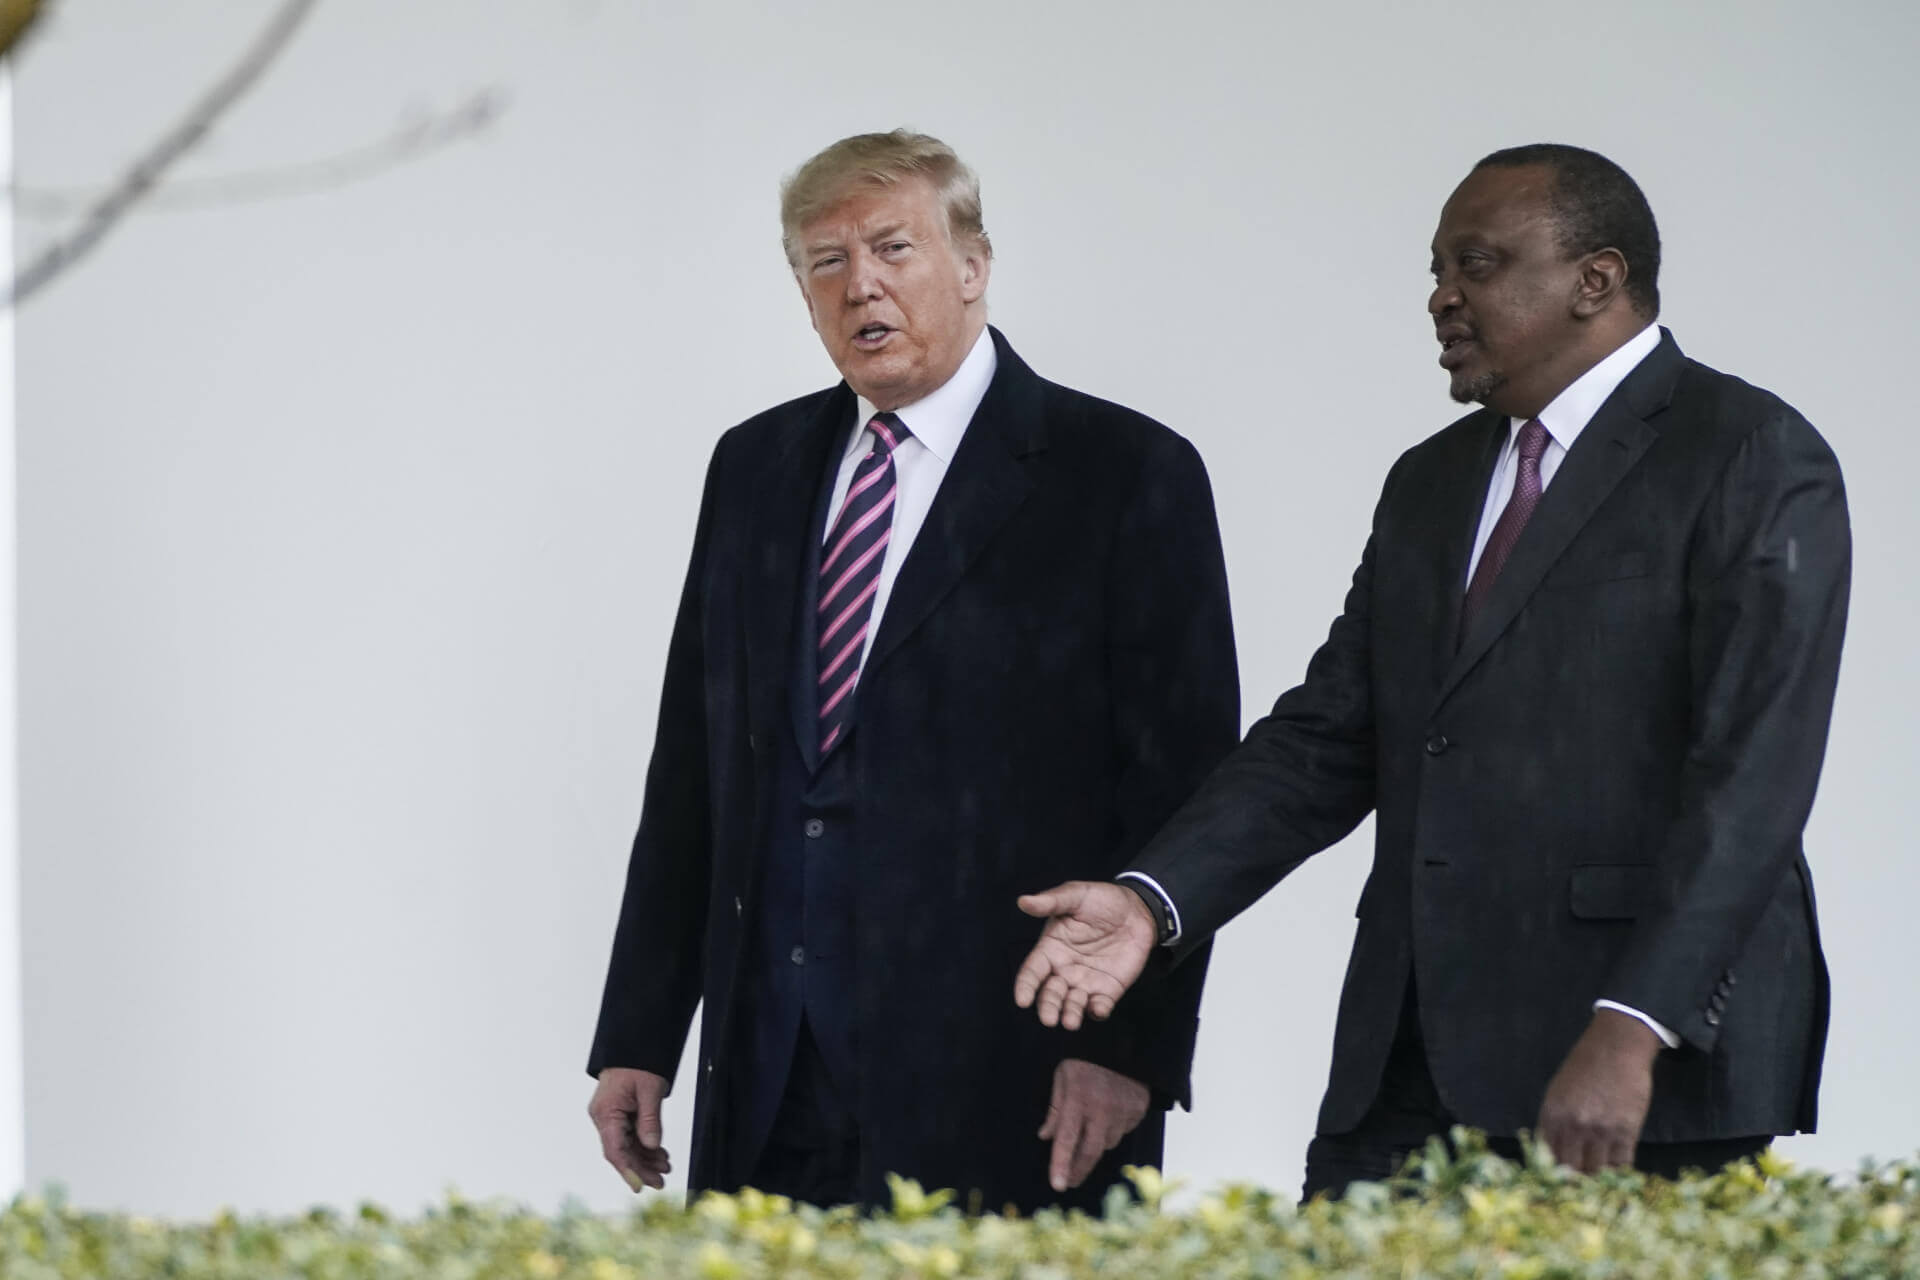 US Insists on Public Support for Israel as Precondition for FTA With Kenya